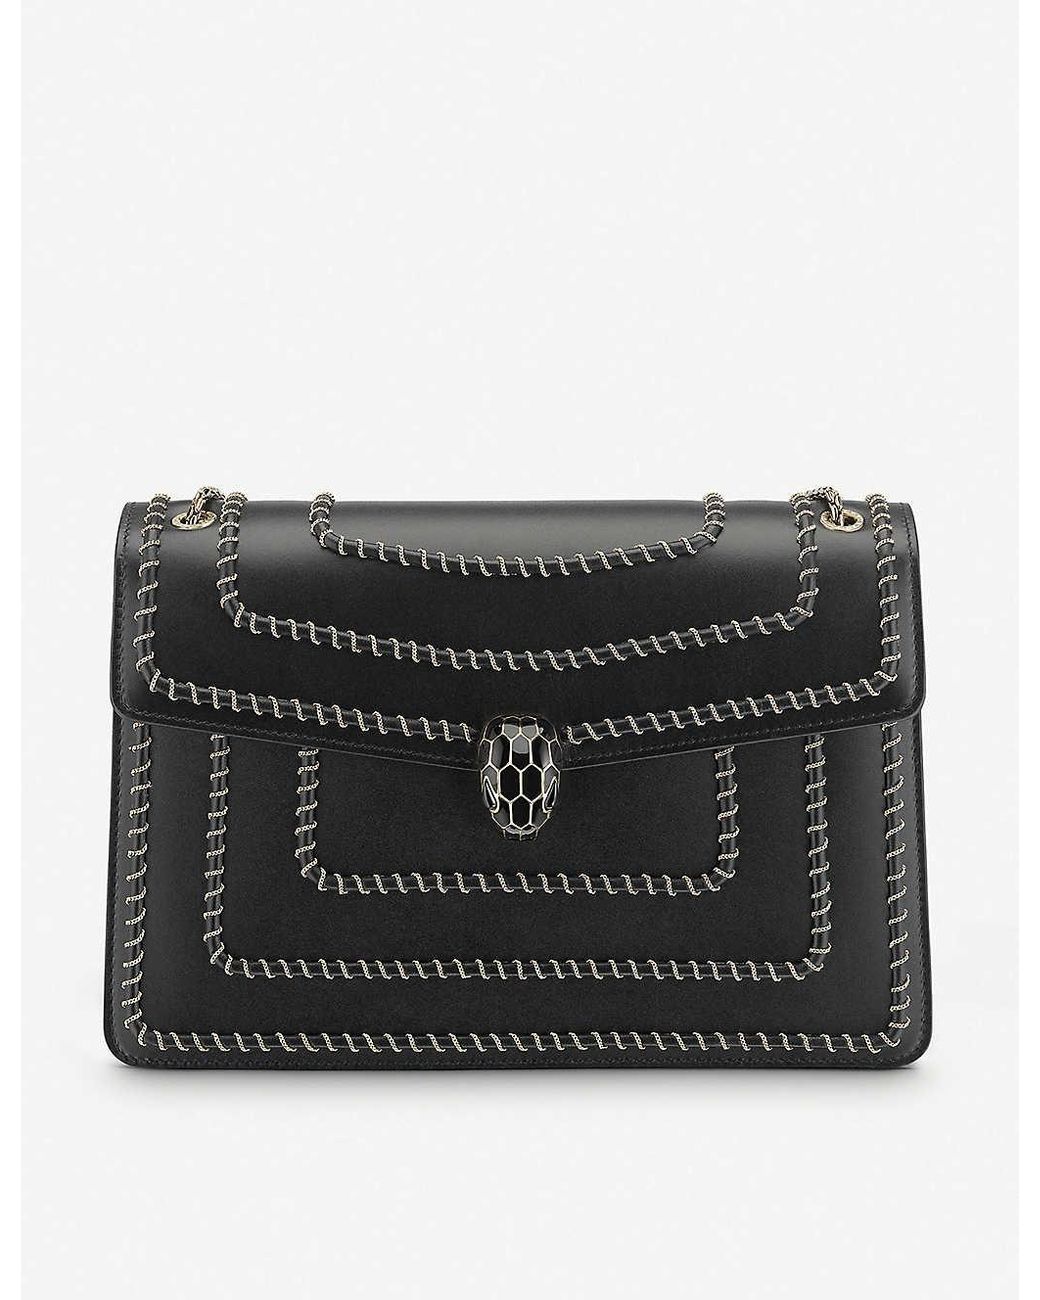 BVLGARI Serpenti Forever Woven Chain Leather Shoulder Bag in Black